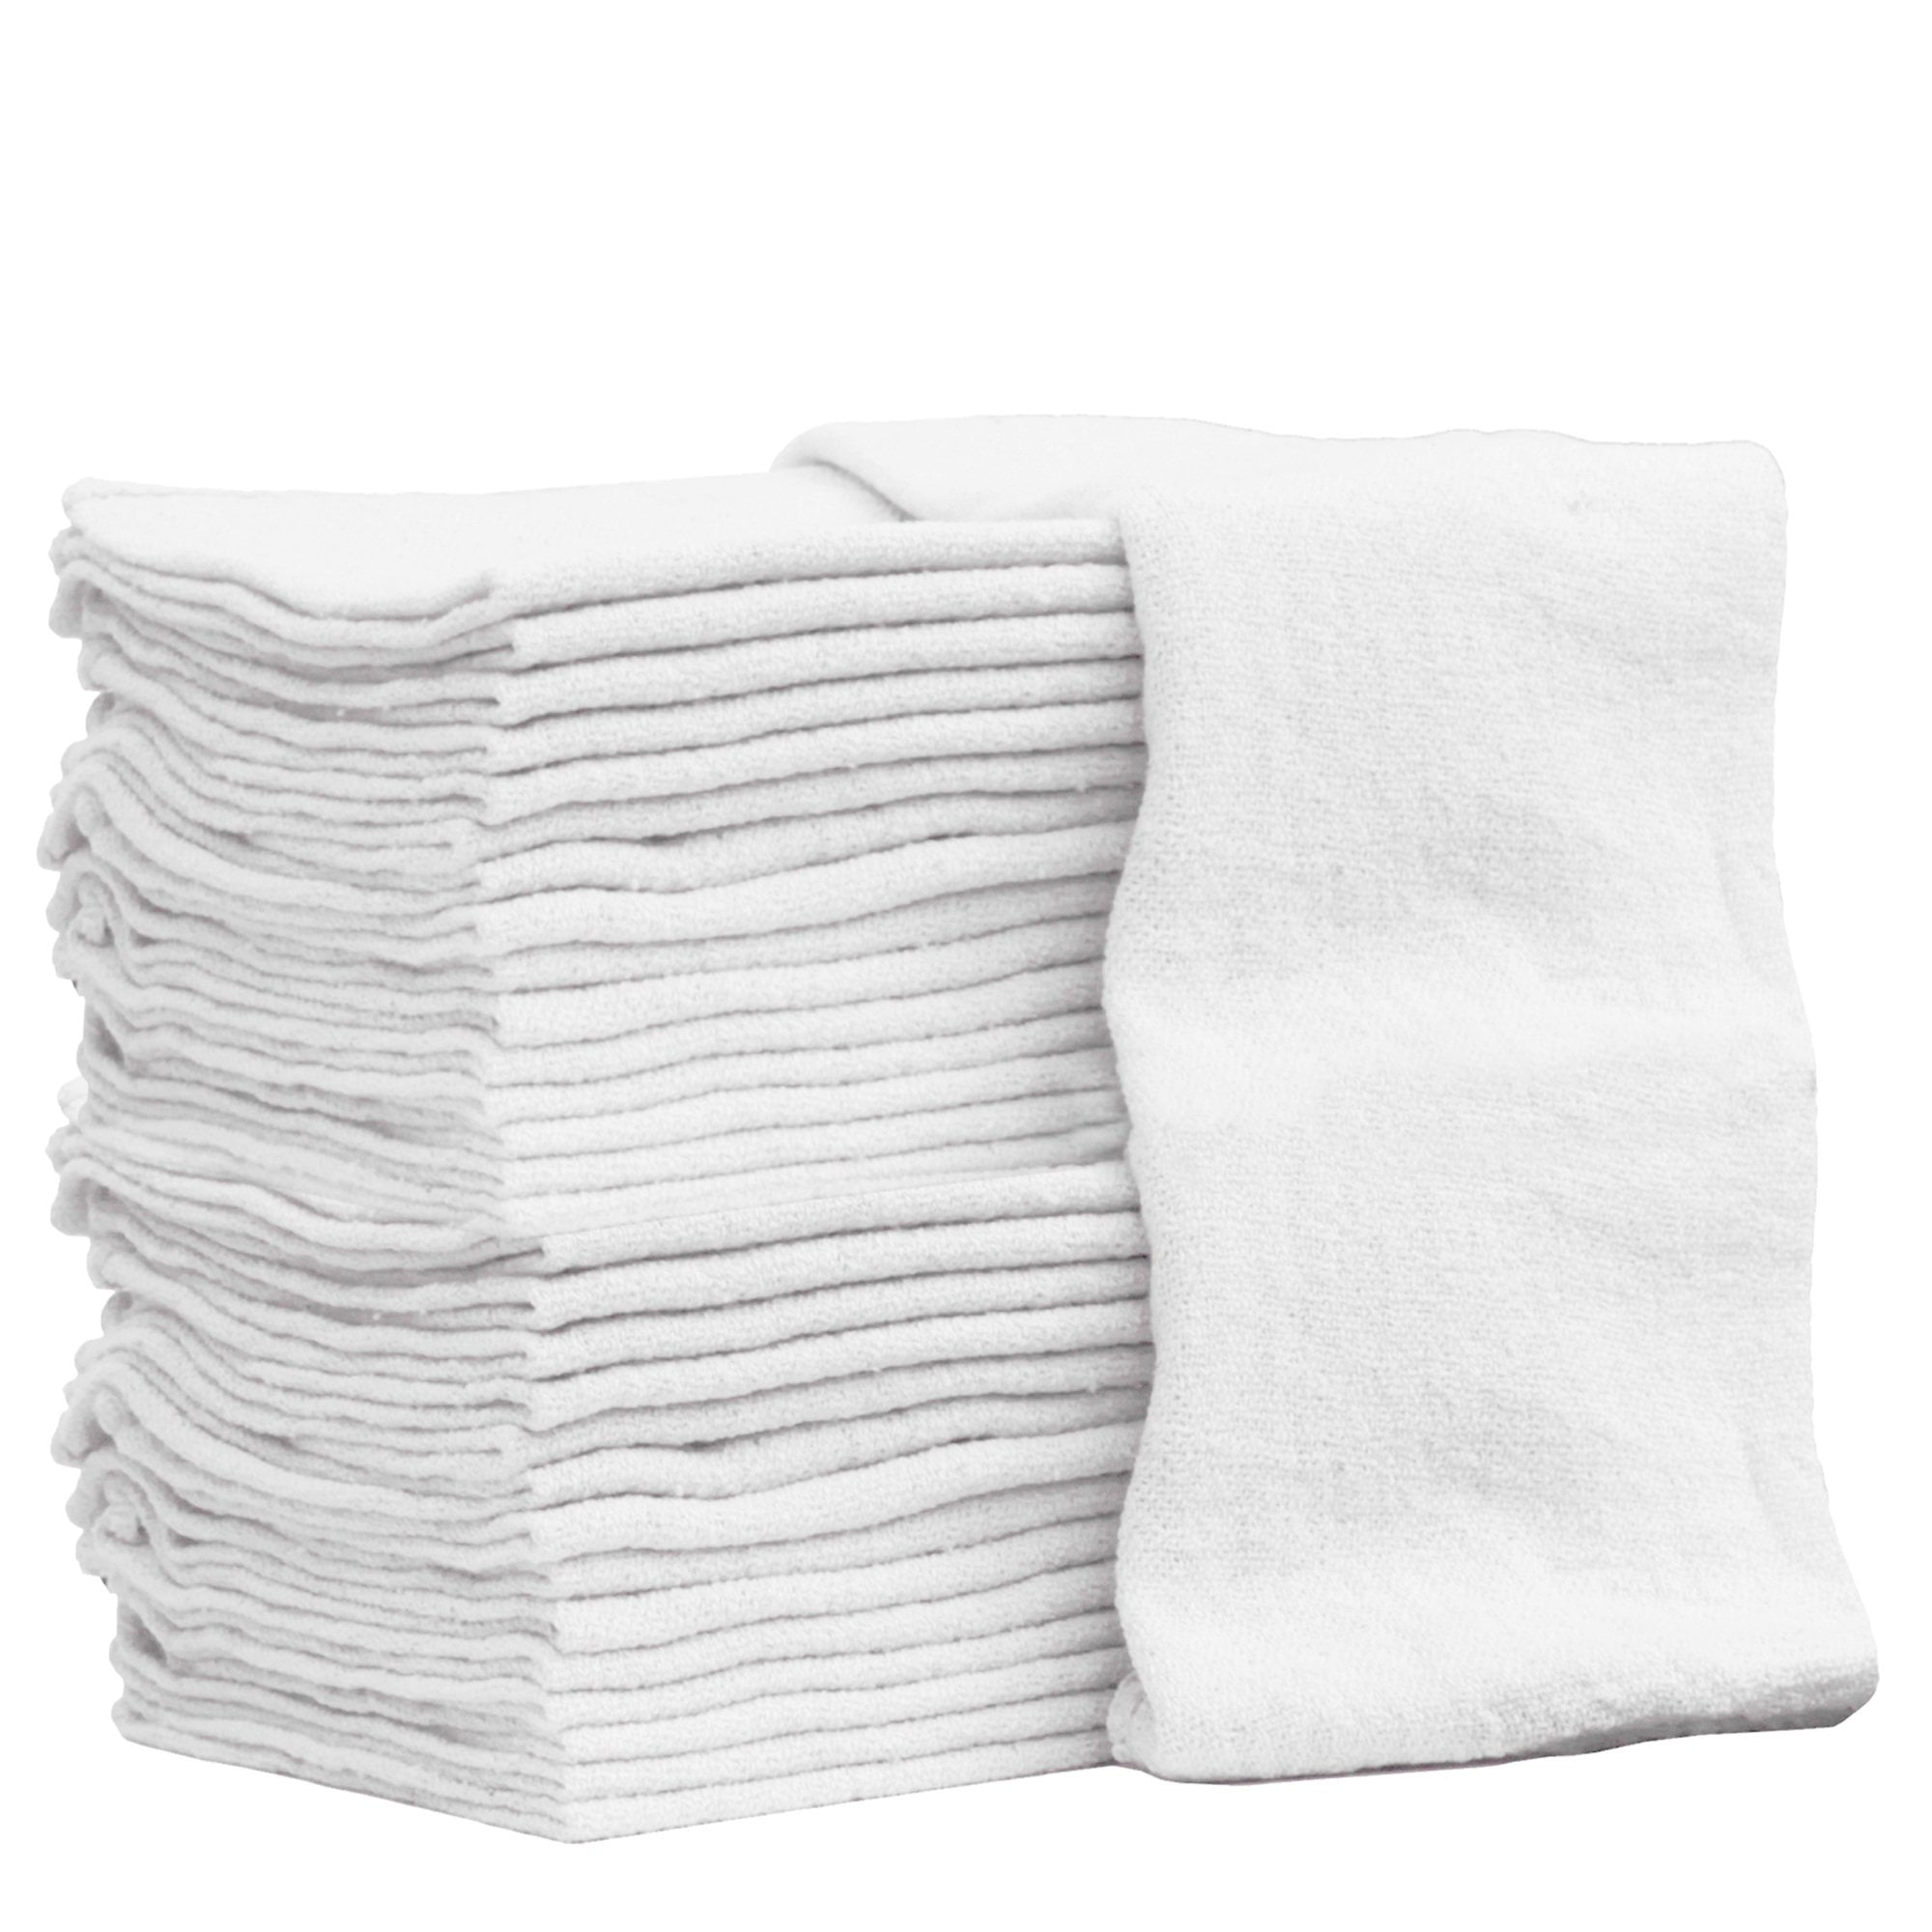 TOWELS RED 12''X12" to 14"x14" HIGH GRADE! 500 INDUSTRIAL SHOP CLEANUP RAGS 